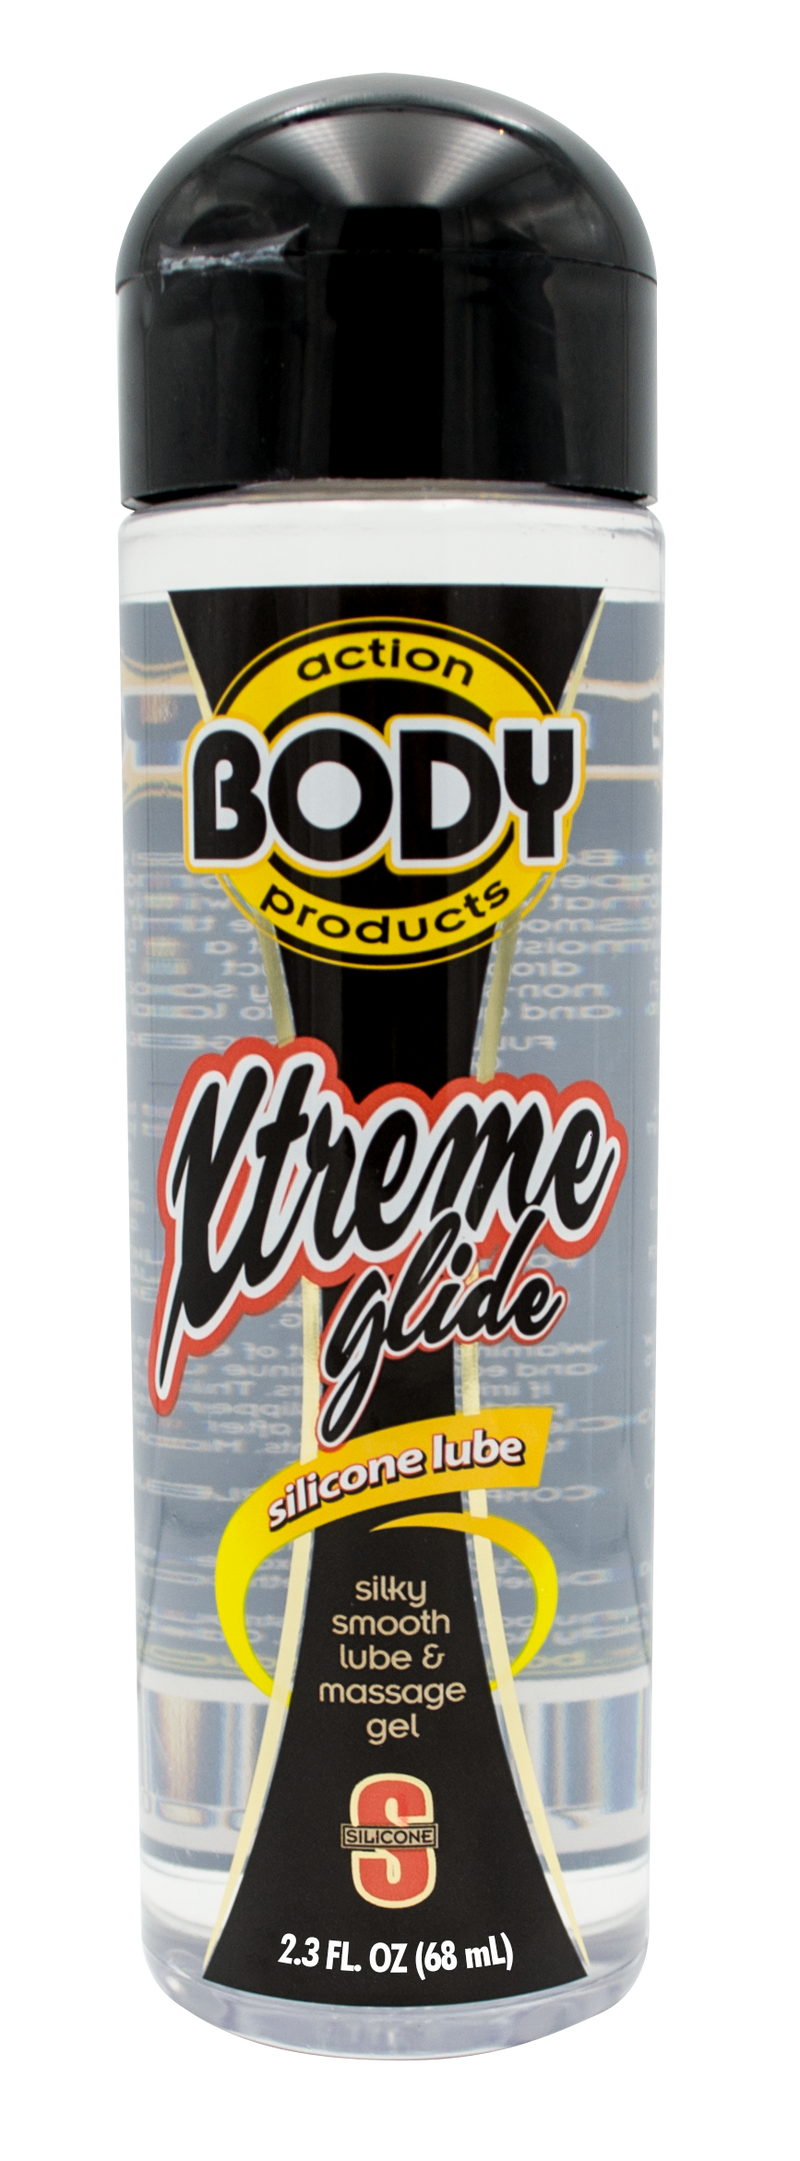 Xtreme Glide Silicone-Based Lubricant for Ultimate Slippery Sensation - Latex-Friendly and Never Sticky - 2.3 Oz